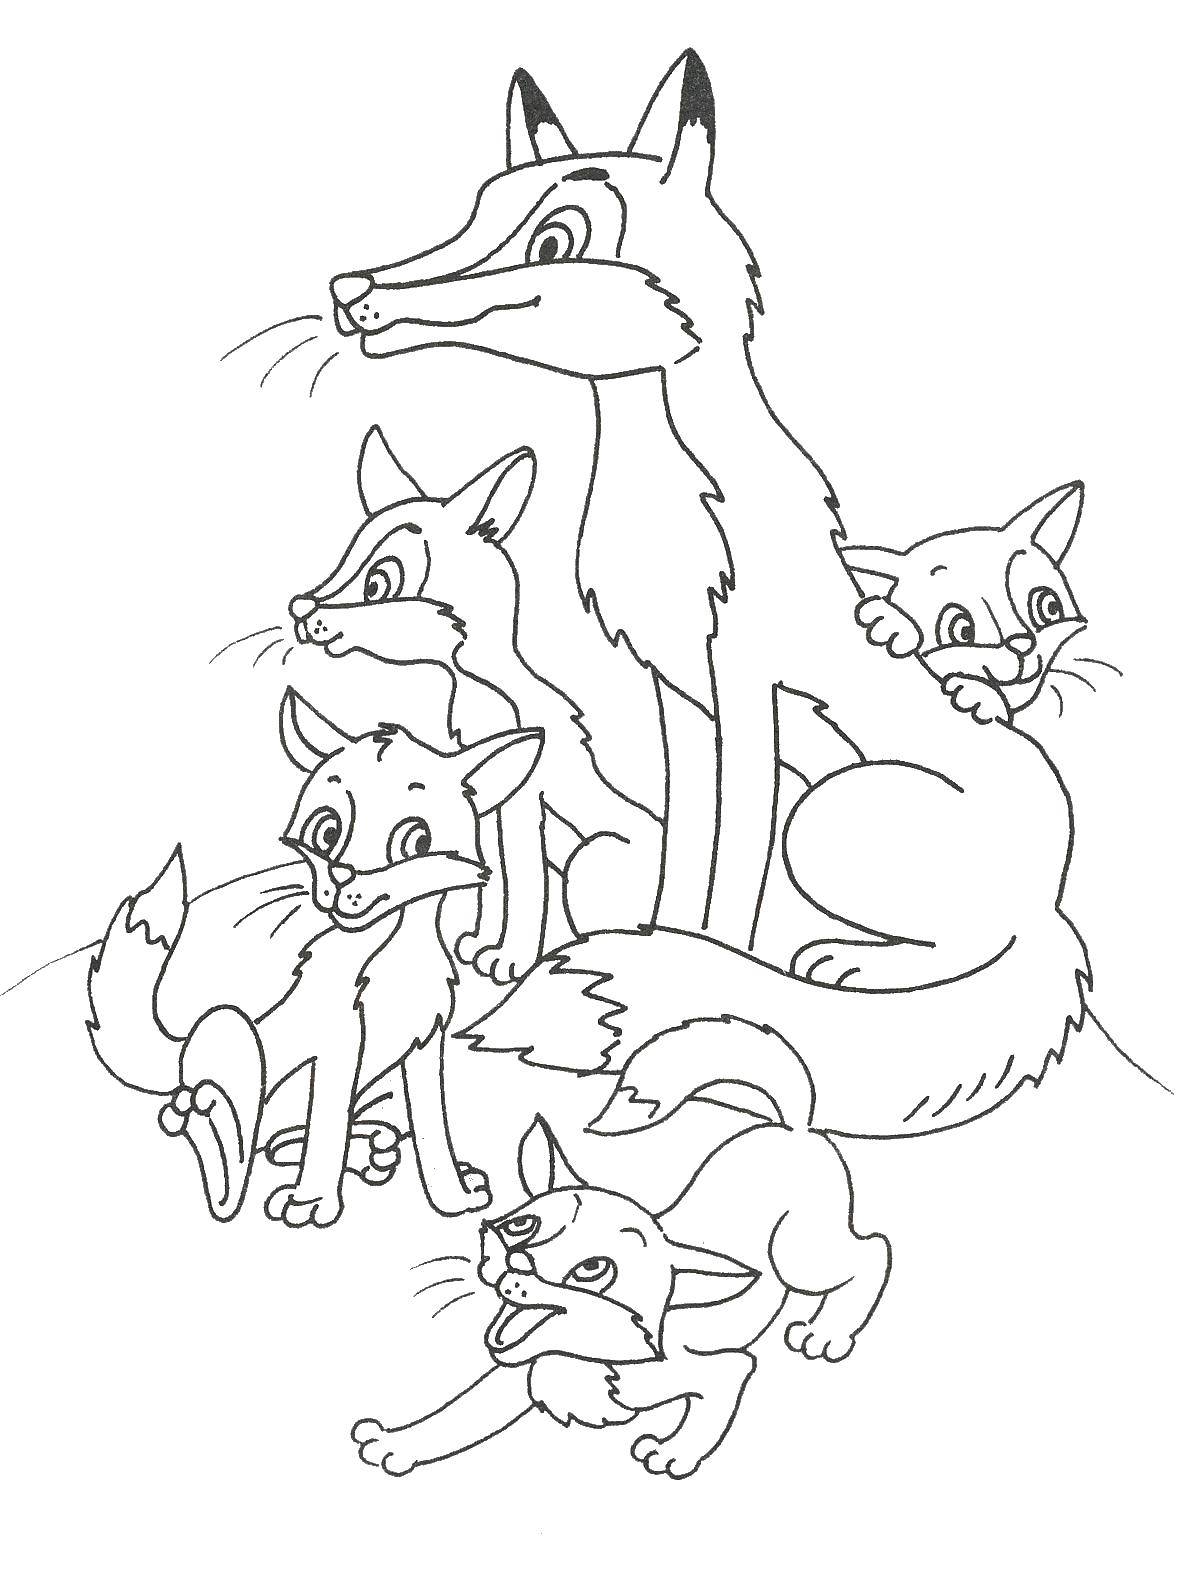 Coloring Fox with cubs. Category the Fox. Tags:  foxy, foxes.